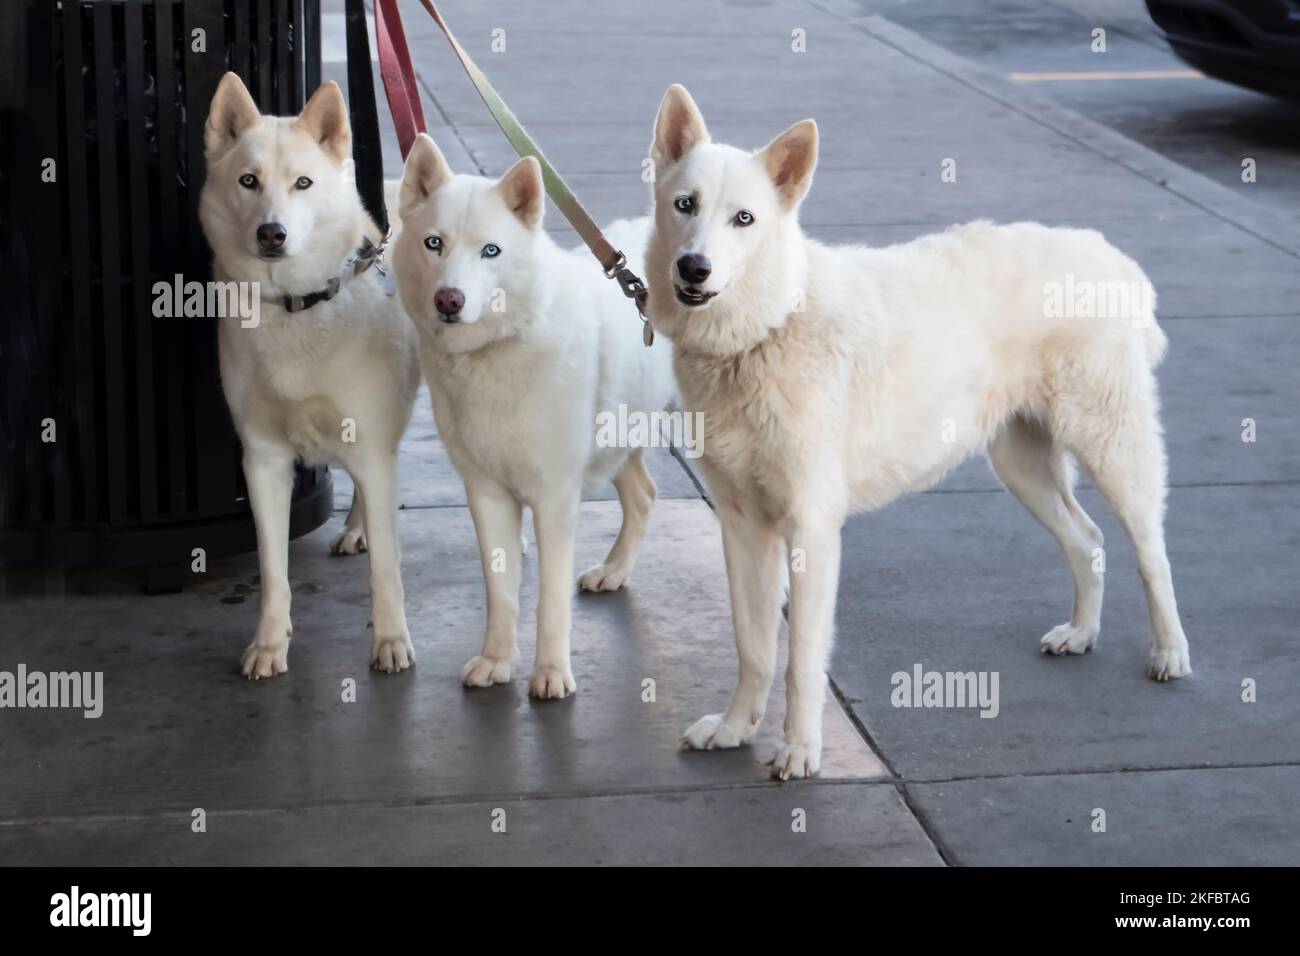 Three beautiful white dogs with ice blue eyes tied to a trash can outside a store while their master shops - looking straight at camera Stock Photo